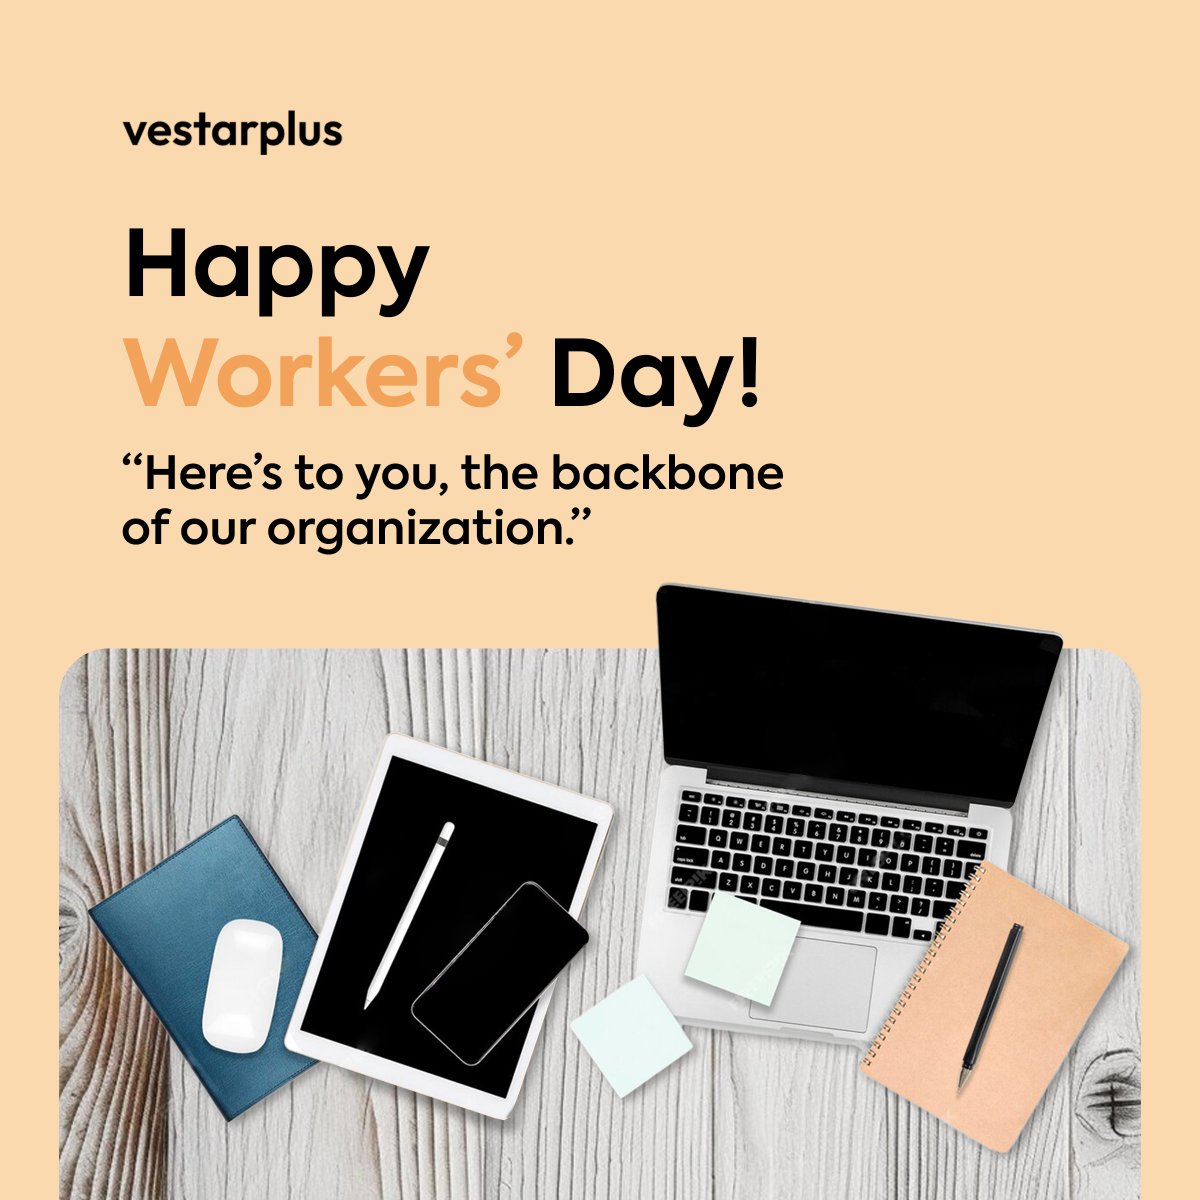 Here's to you, the backbone of our organization. Happy workers day!.... #workersday #labourday #tech #agency #startup #office